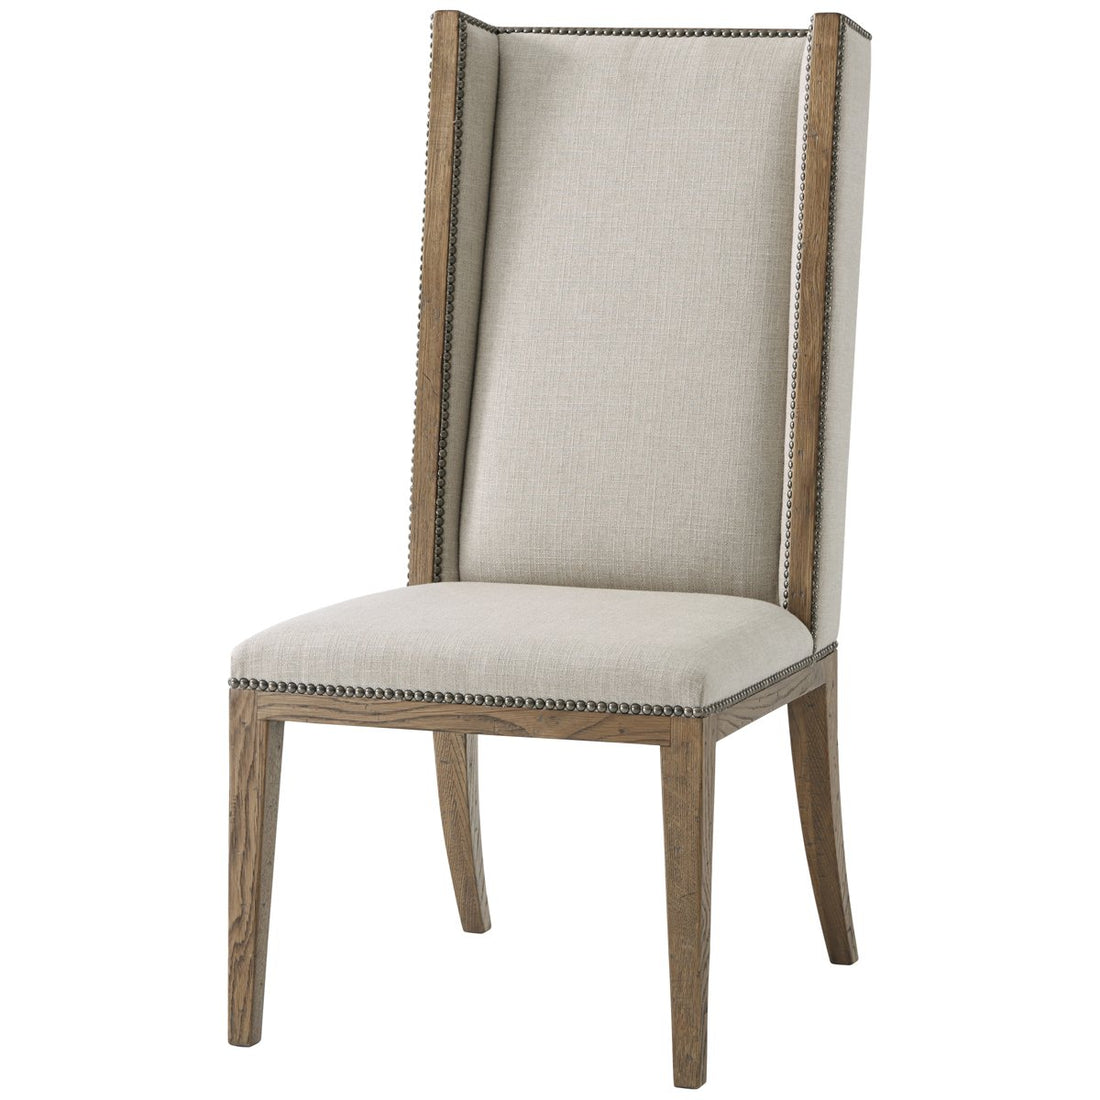 Theodore Alexander The Echoes Aston Chair, Set of 2